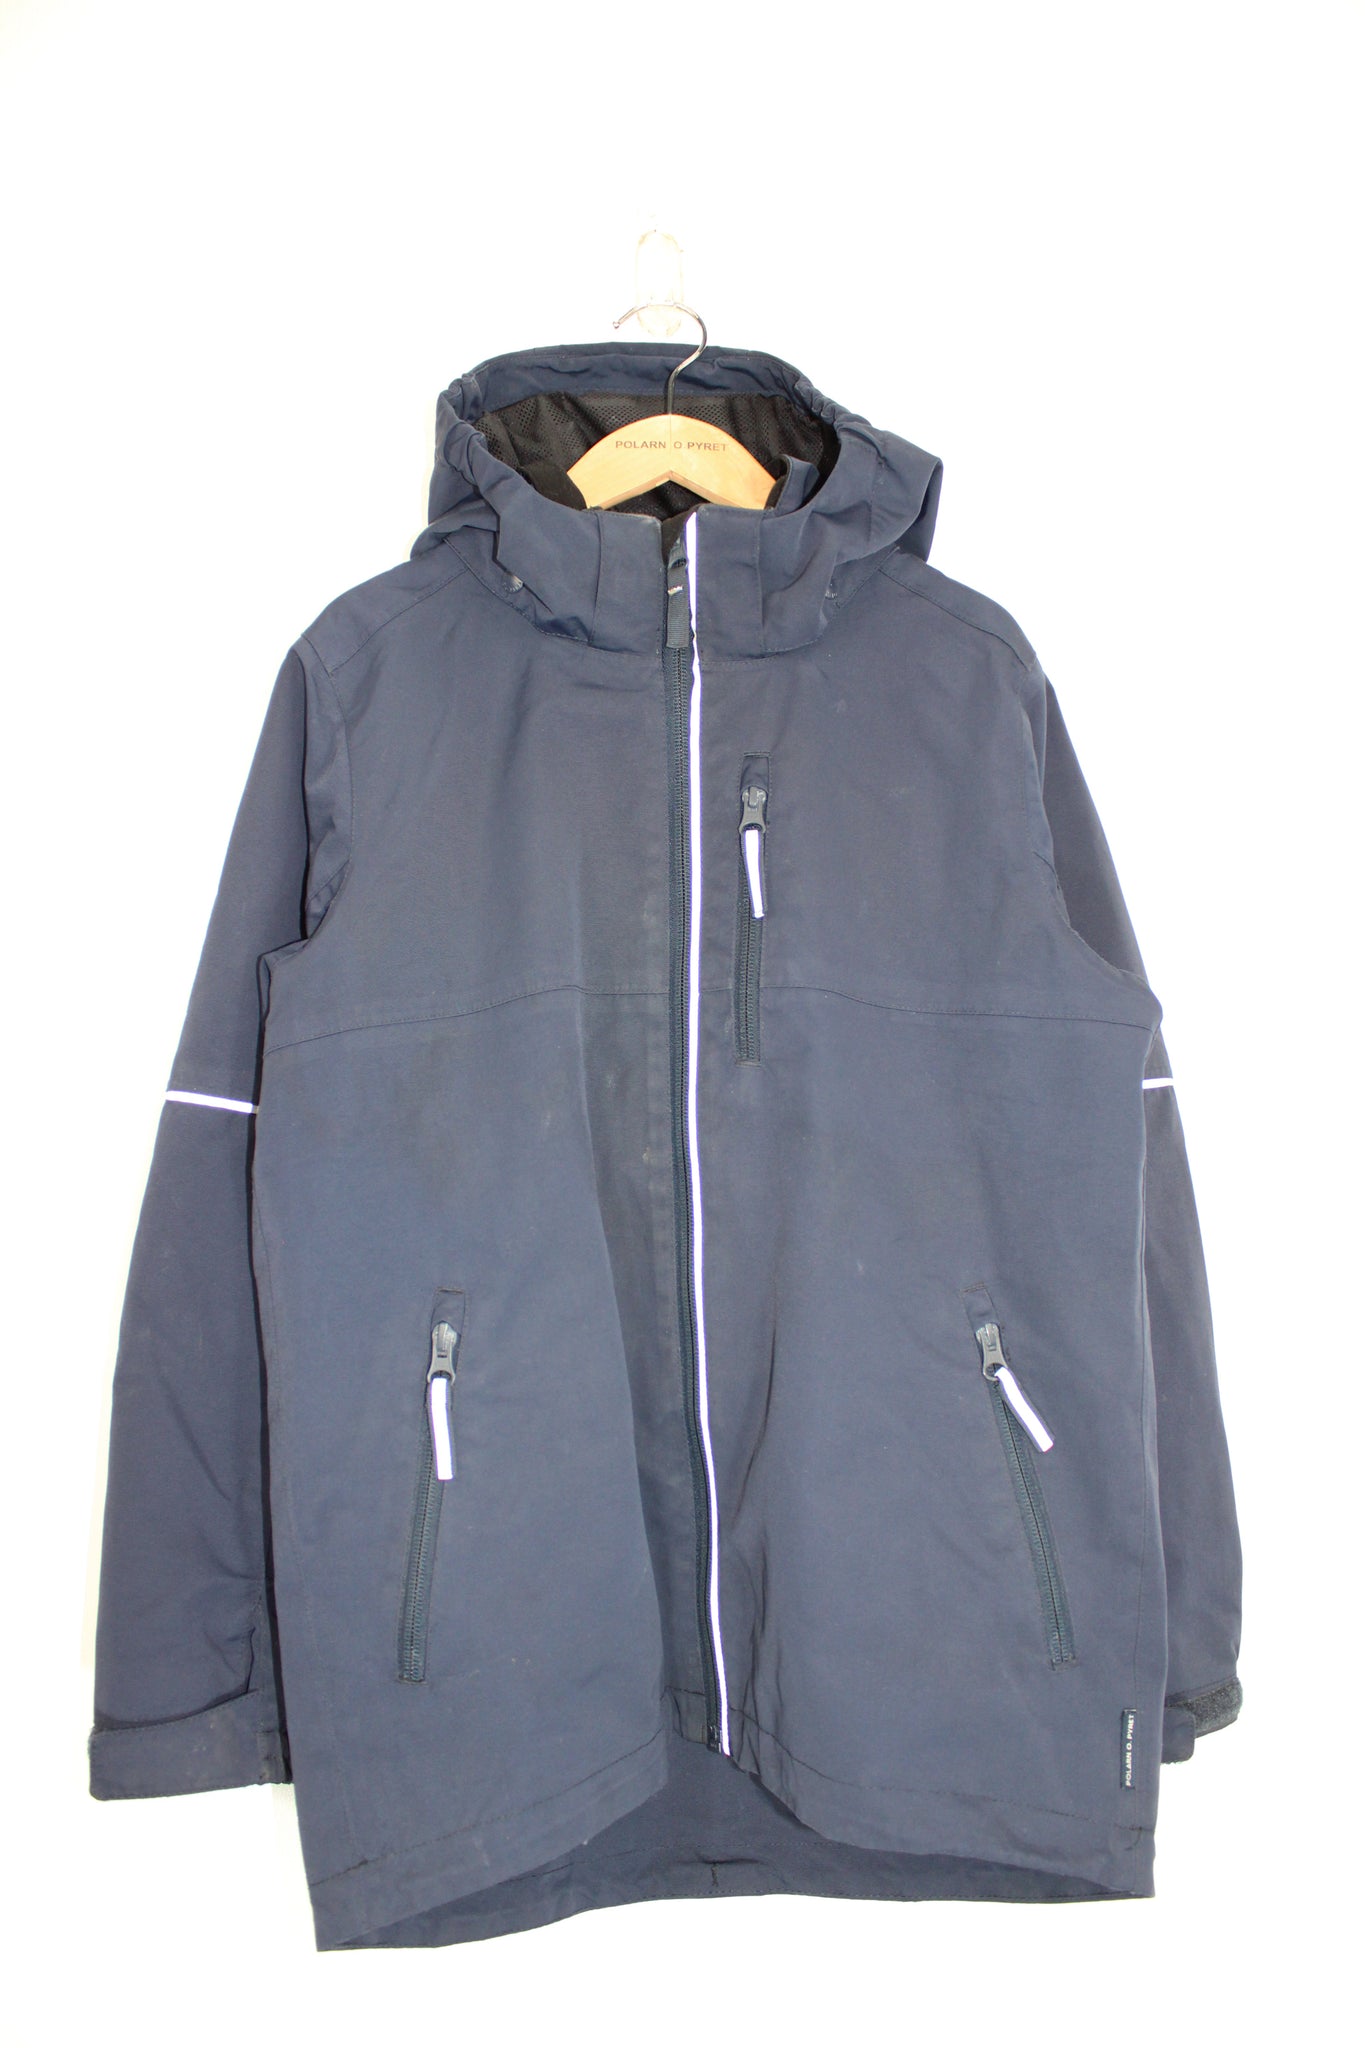 Kids Padded Shell Jacket 9-10y / 140